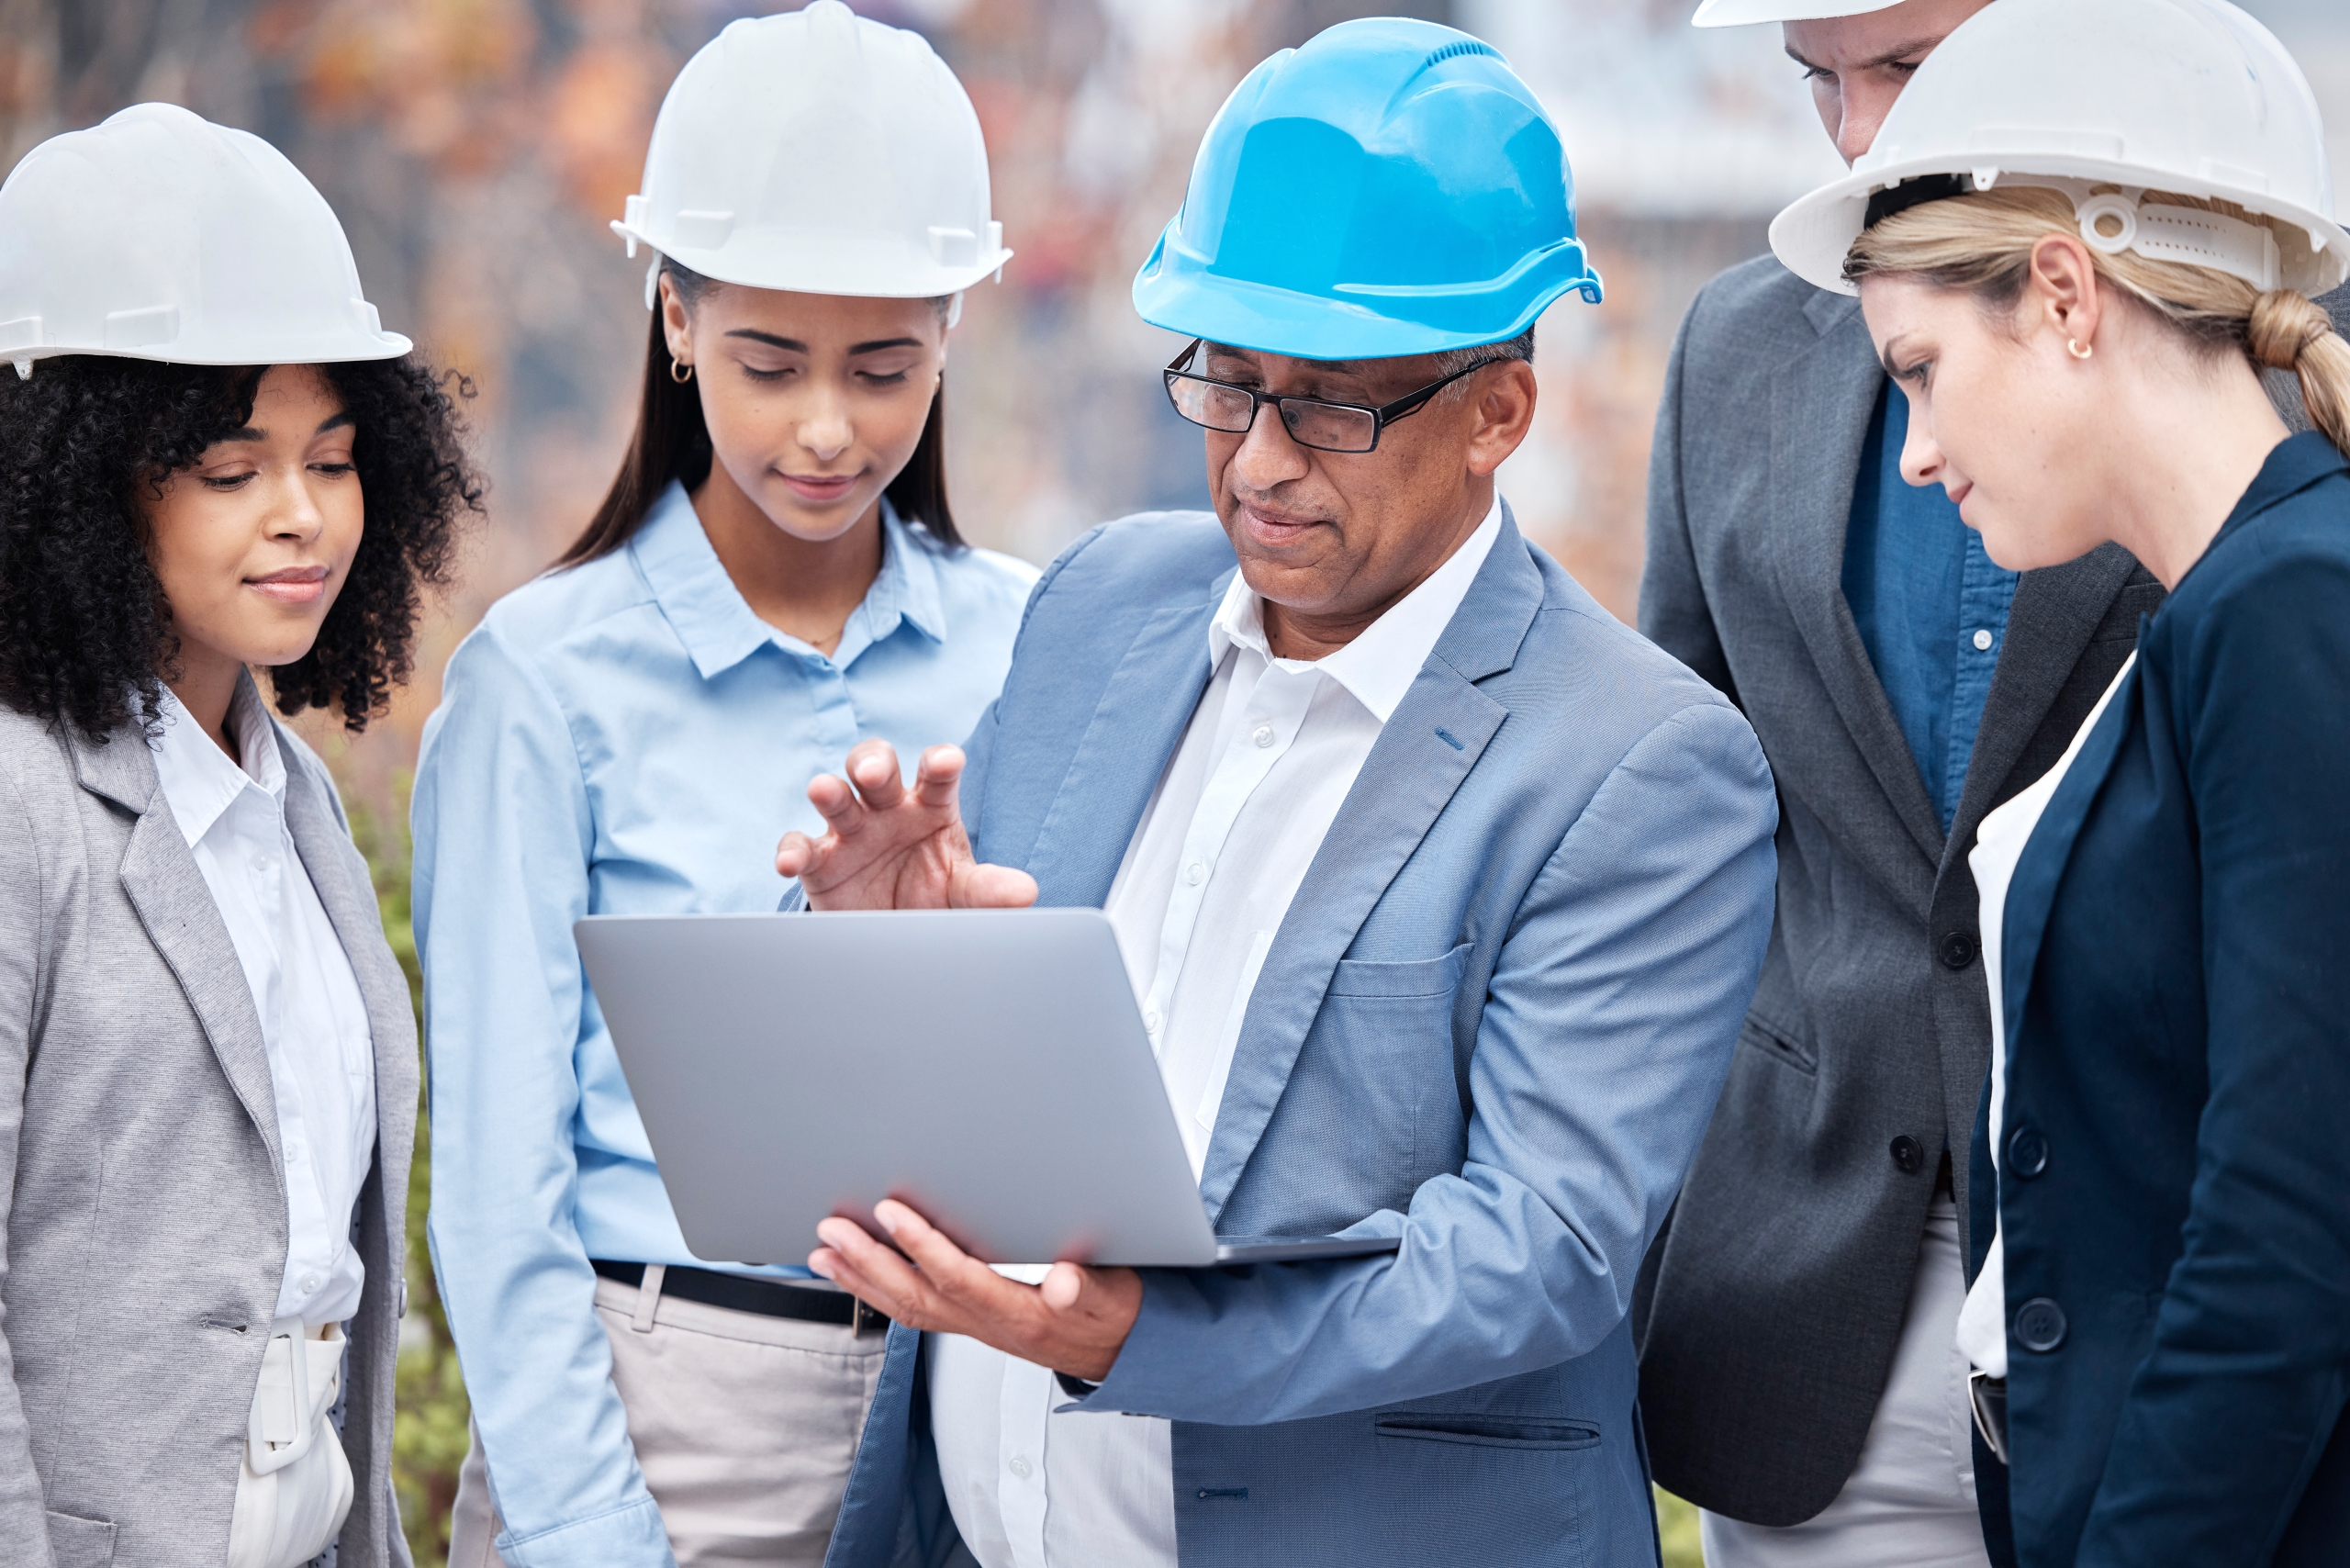 Acumatica, an industry-leading business solutions provider, and the Construction Financial Management Association (CFMA), announced a program to provide a free one-year CFMA membership to Acumatica construction customers.